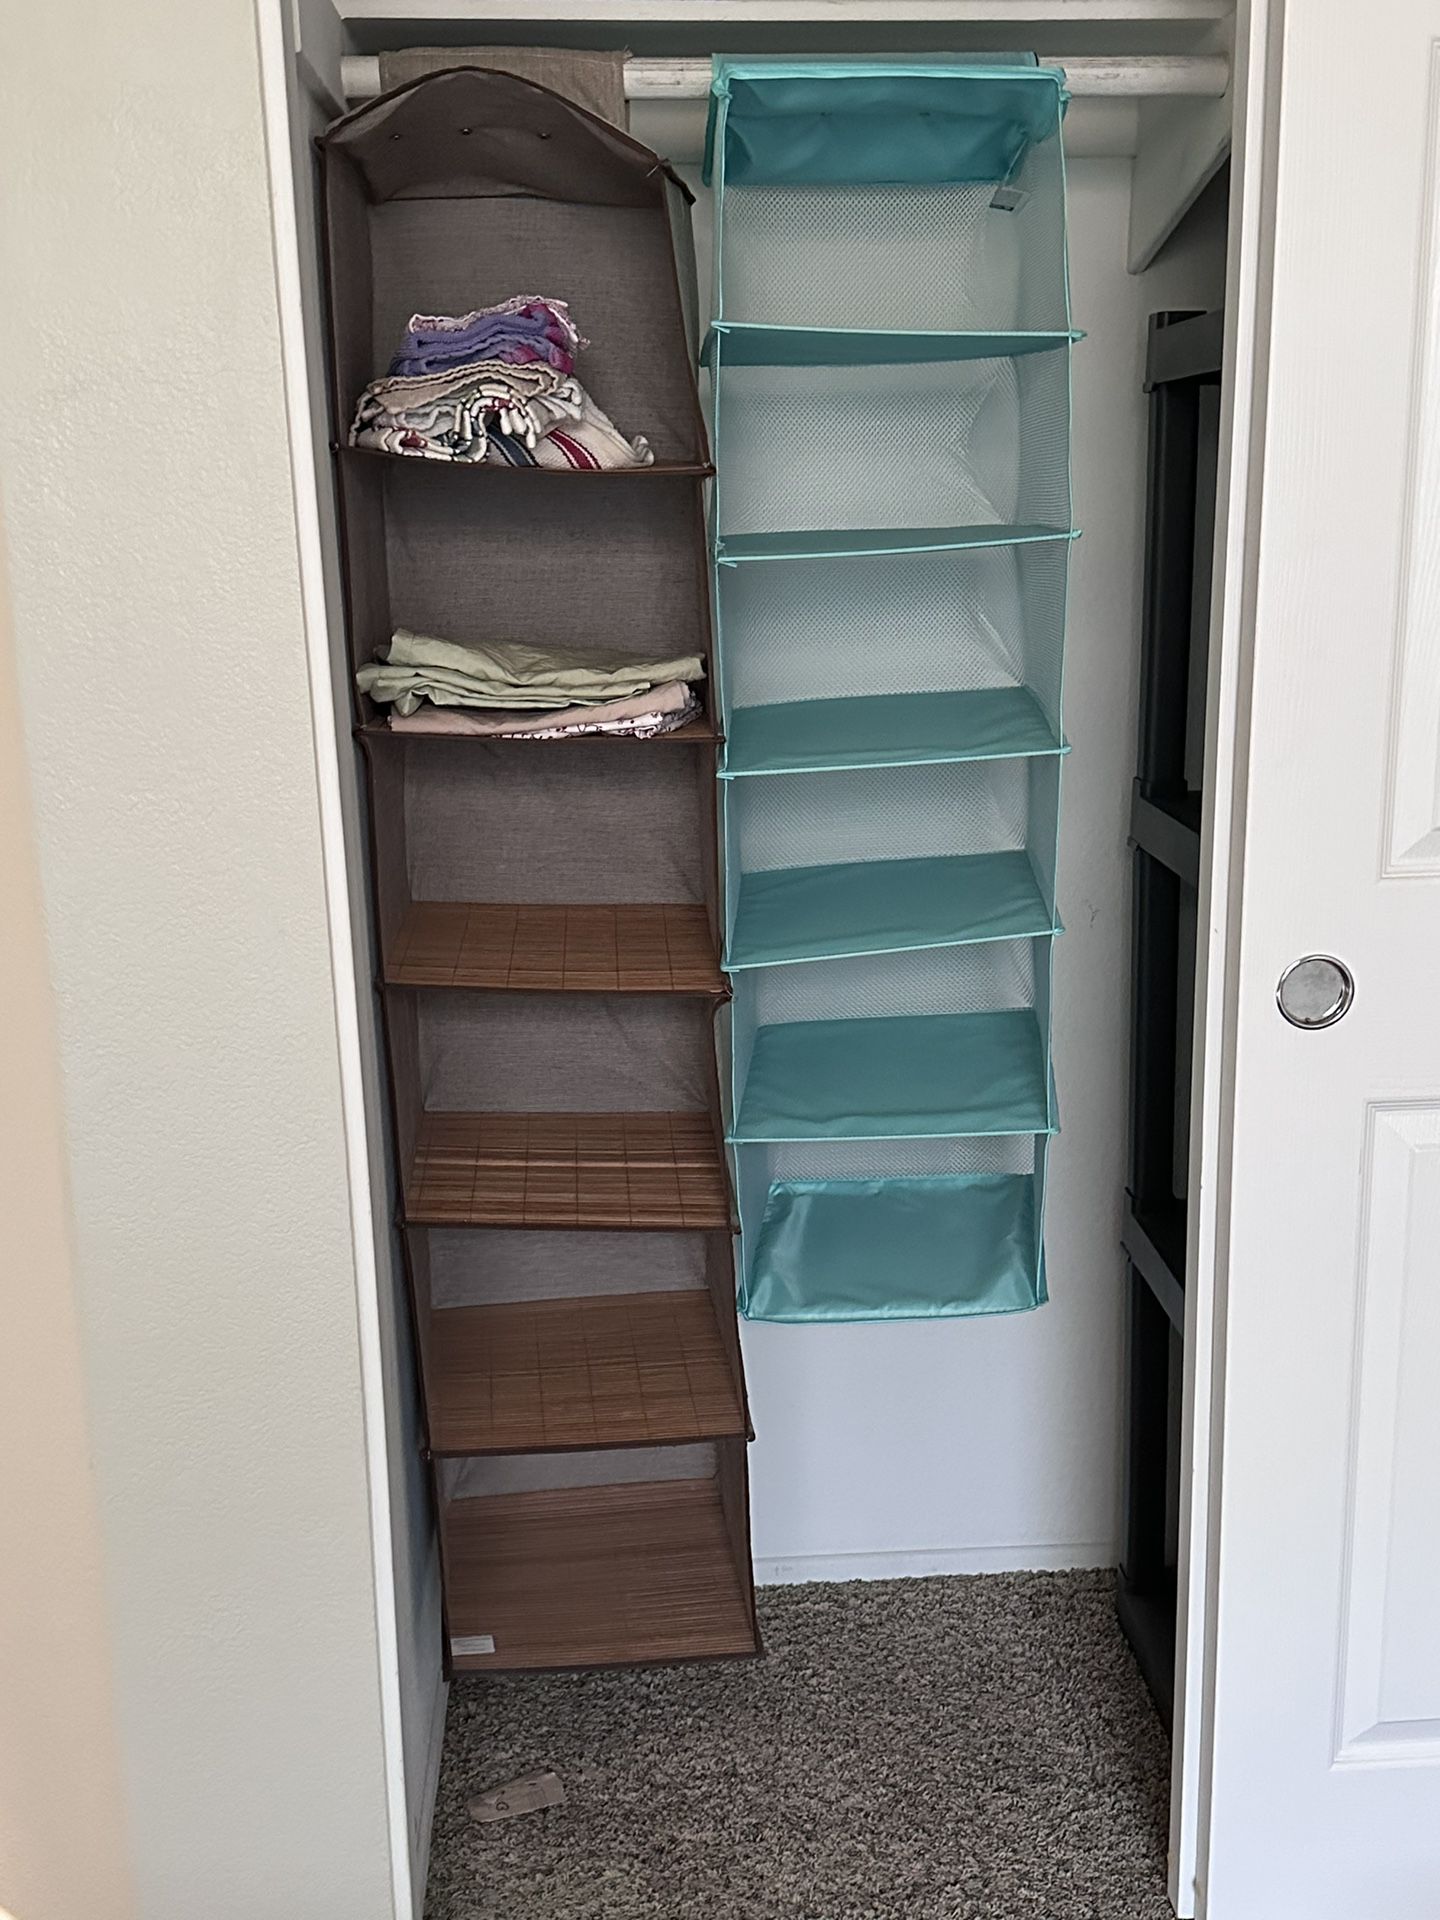 Hanging Shelves For The Closet - 2 For Just  $14.99